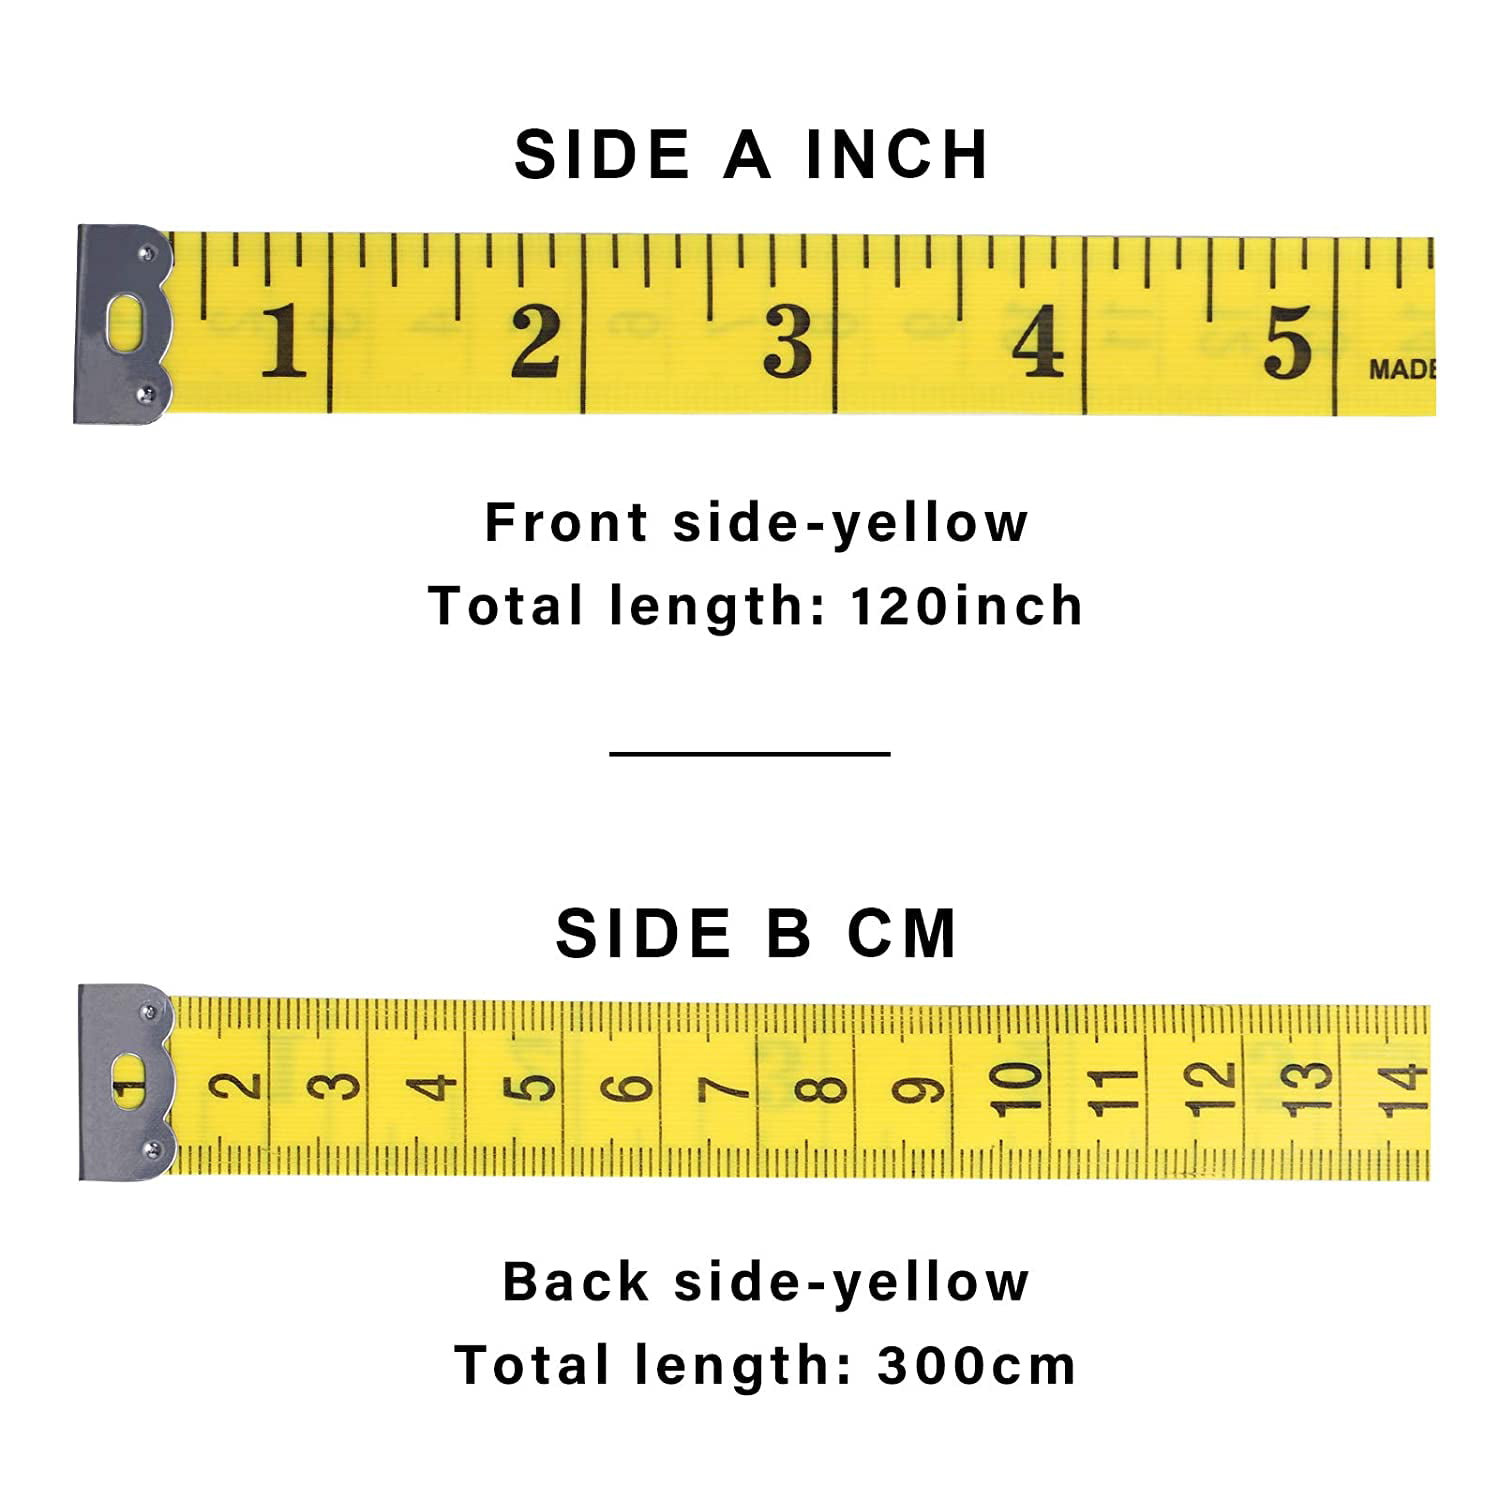 3m/120 Tape Measure Body Measuring Tape for Body Cloth Tape Measure for  Sewing Fabric Tailors High Accuracy Waterproof Leather Sewing Tape Measure